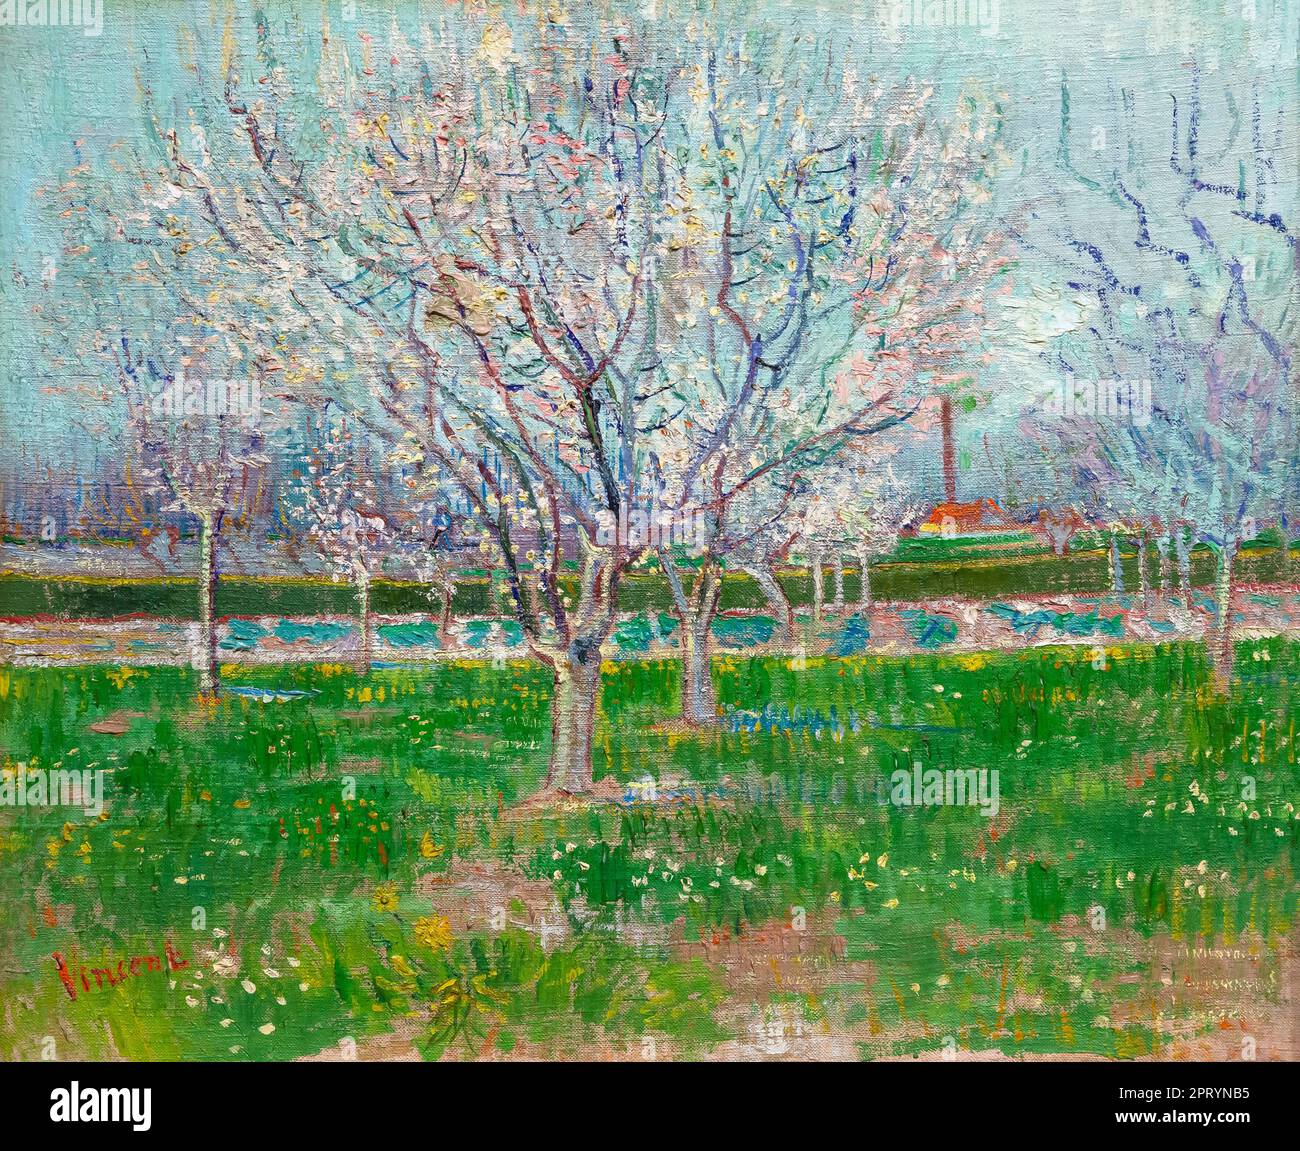 Orchard in Blossom, Plum Trees, Vincent van Gogh, 1888, Banque D'Images